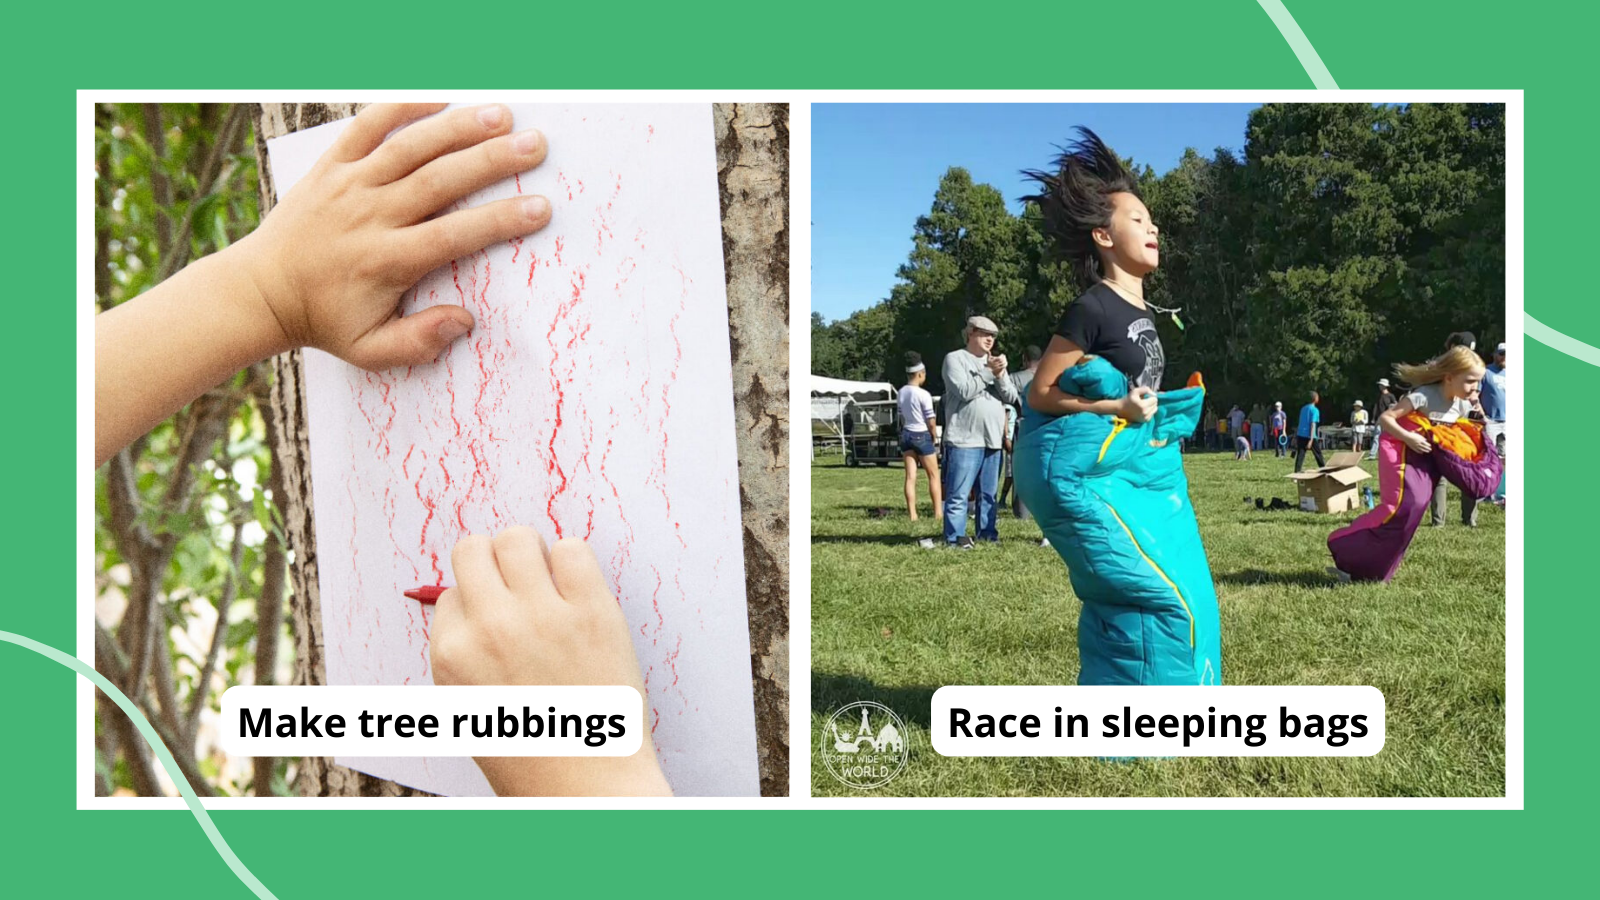 Camping activities for kids, including making tree rubbings and having a sleeping bag race.